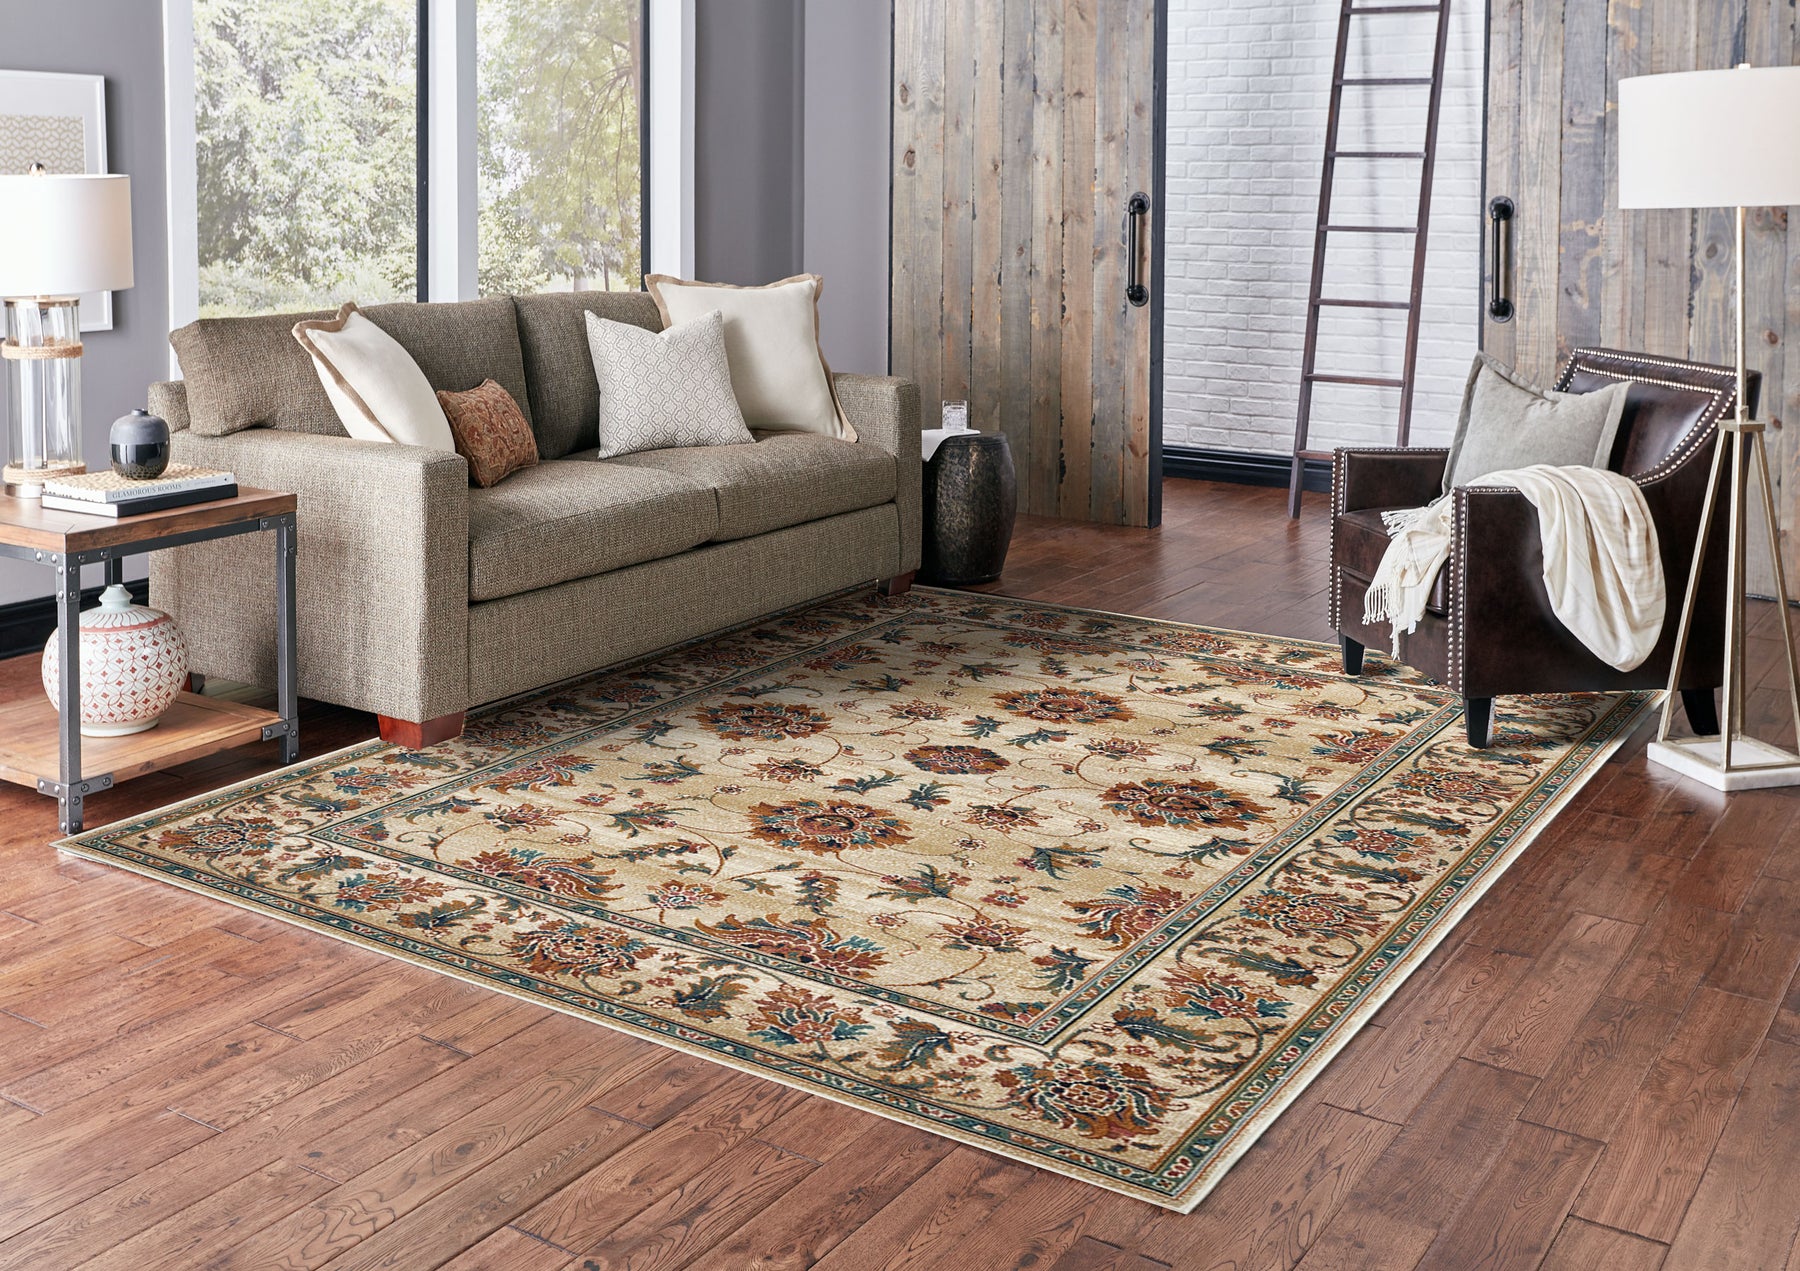 The Average Cost of Rugs: Are You Overpaying for Retail?